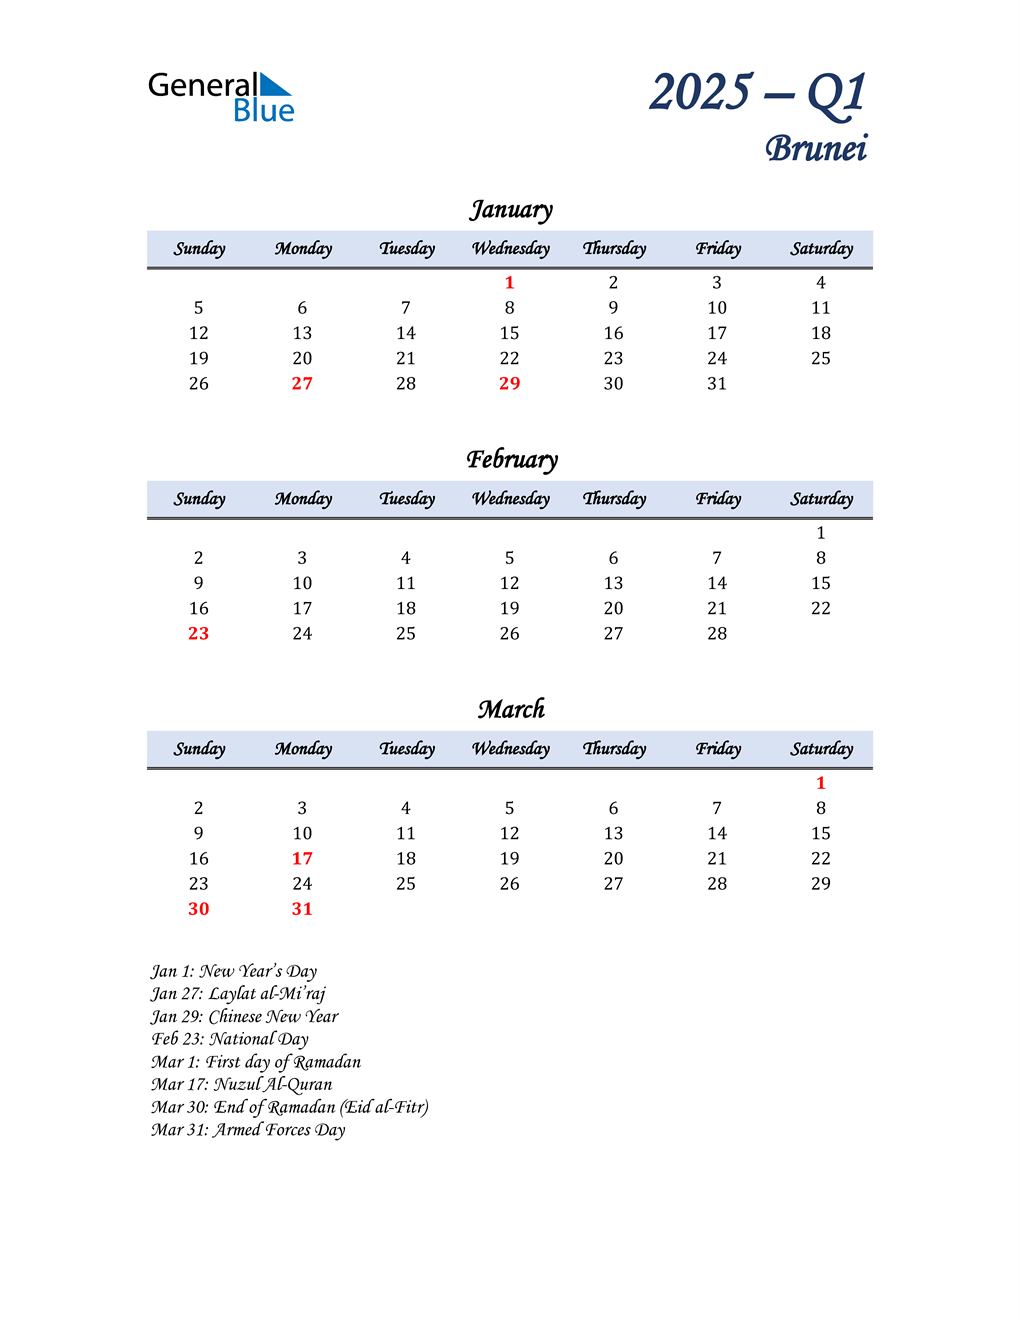  January, February, and March Calendar for Brunei